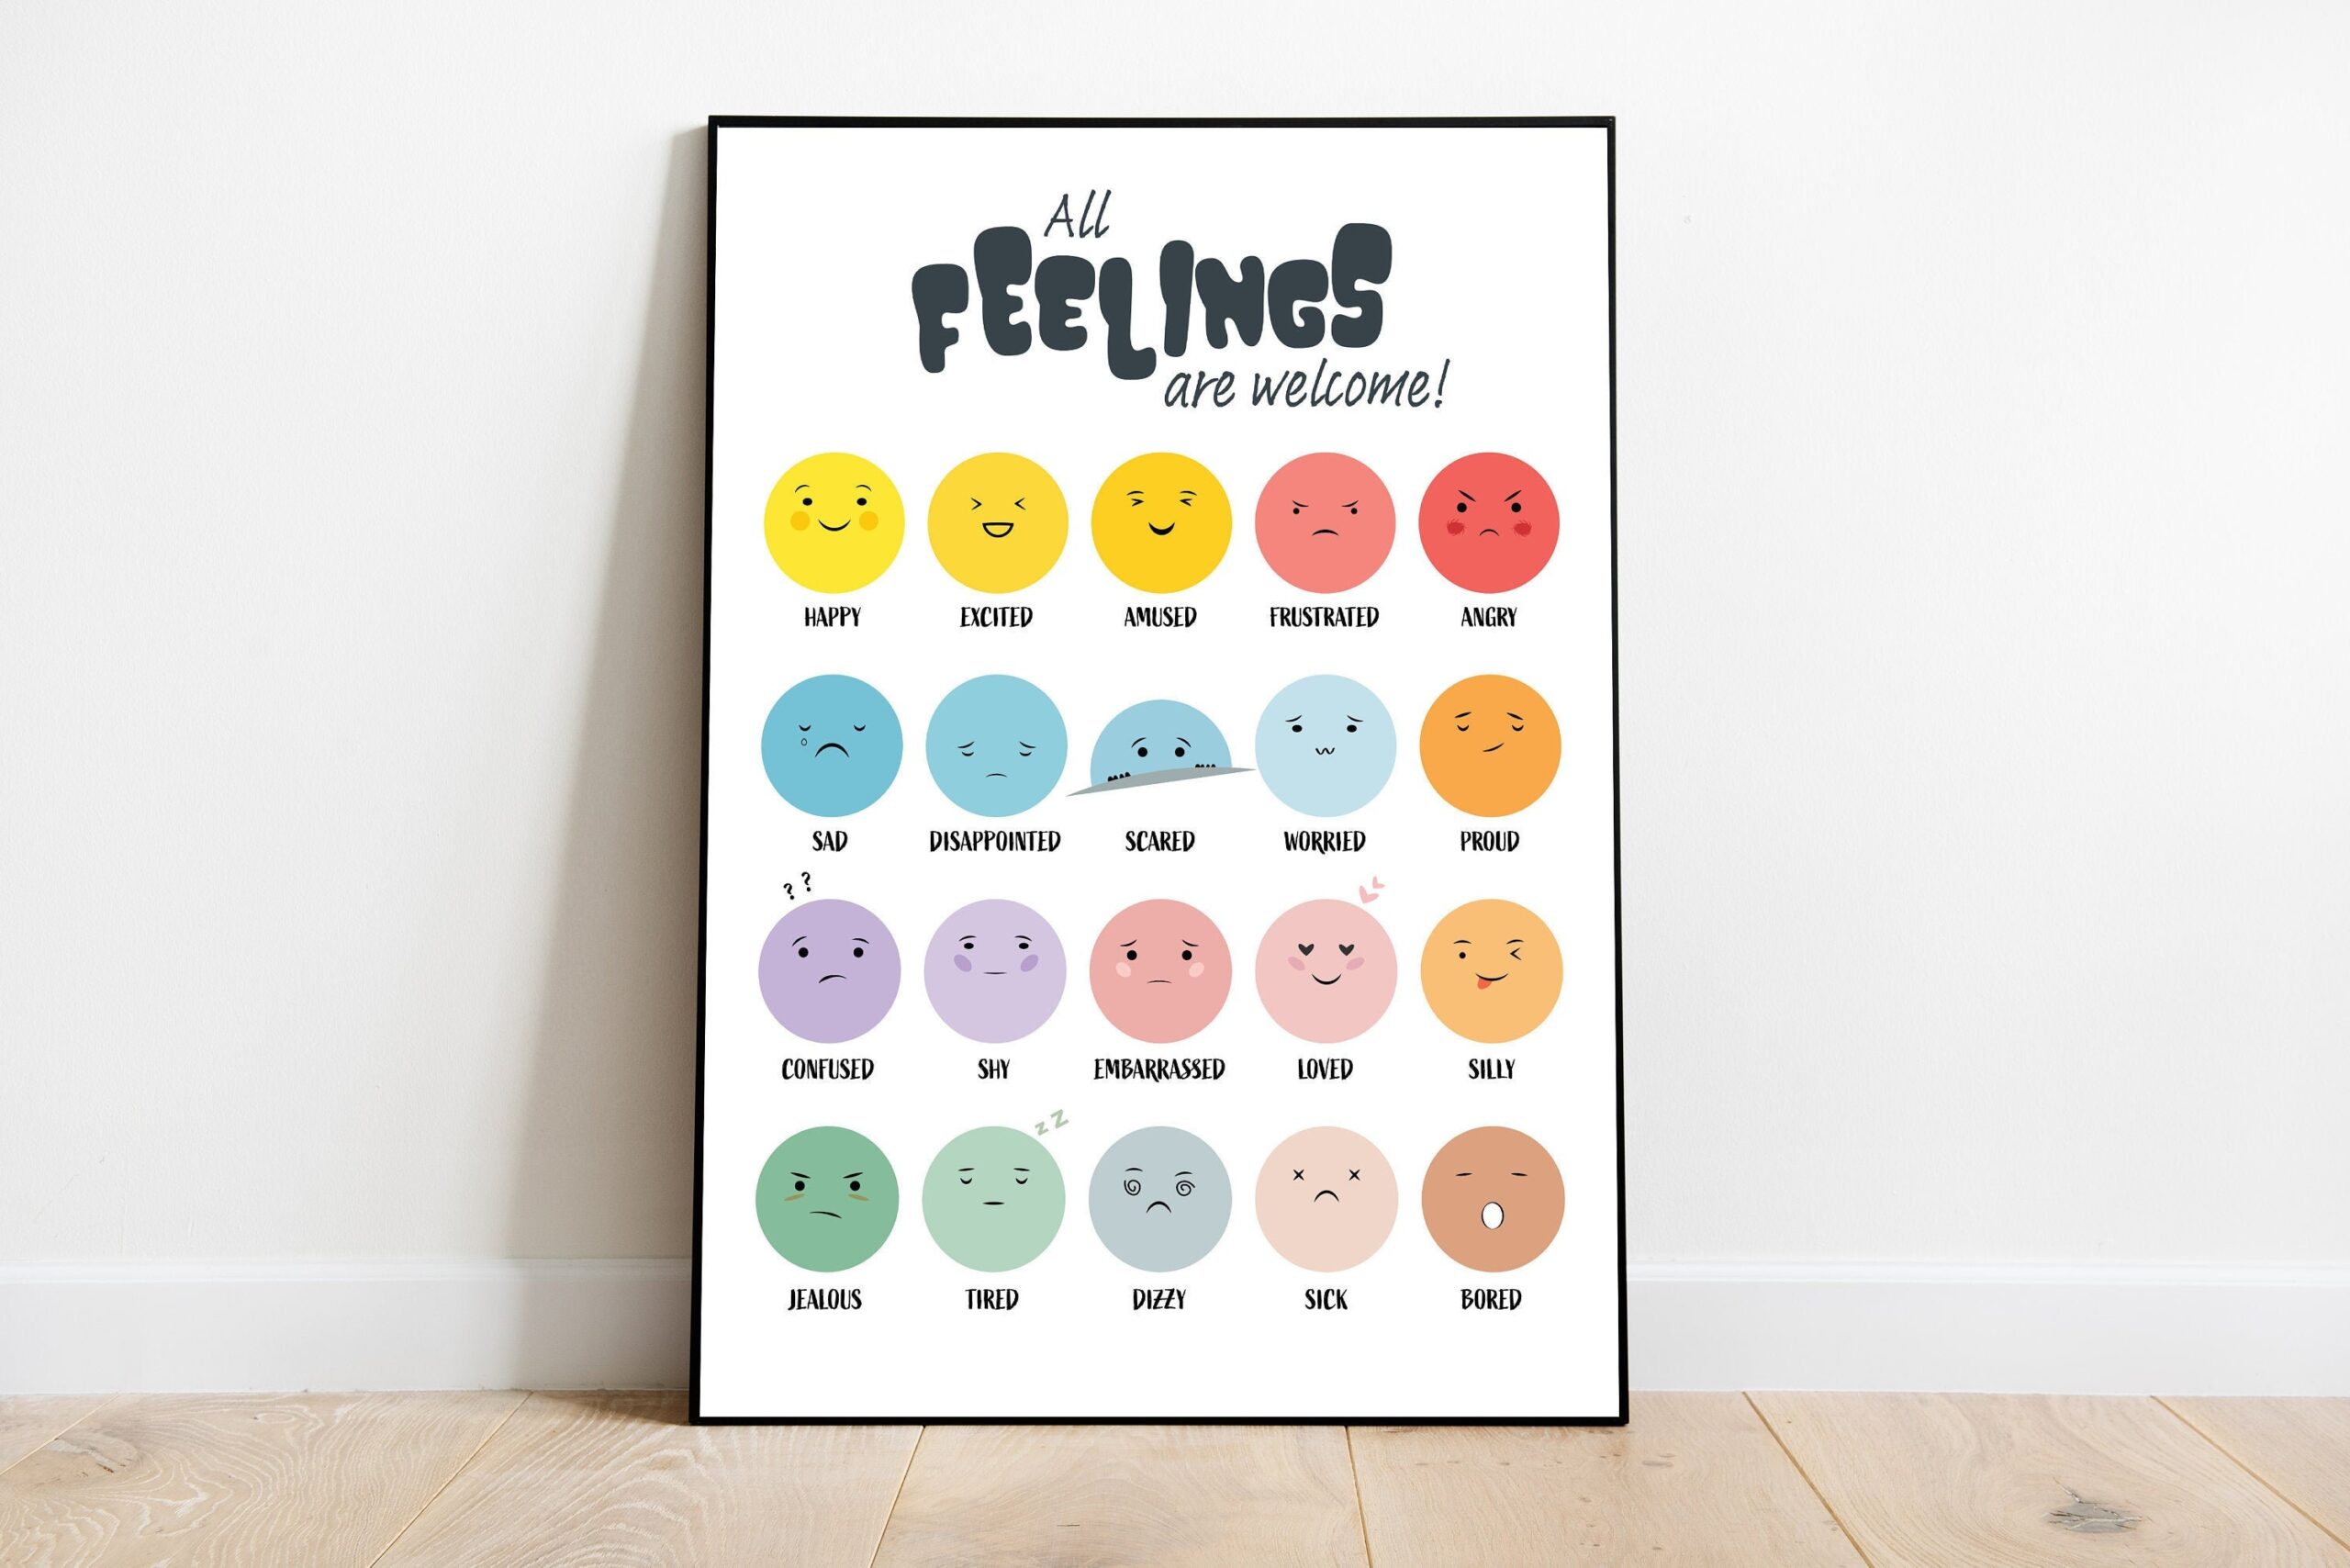 Emotions All Feelings Are Welcome Chart Educational Classroom No Framed Poster